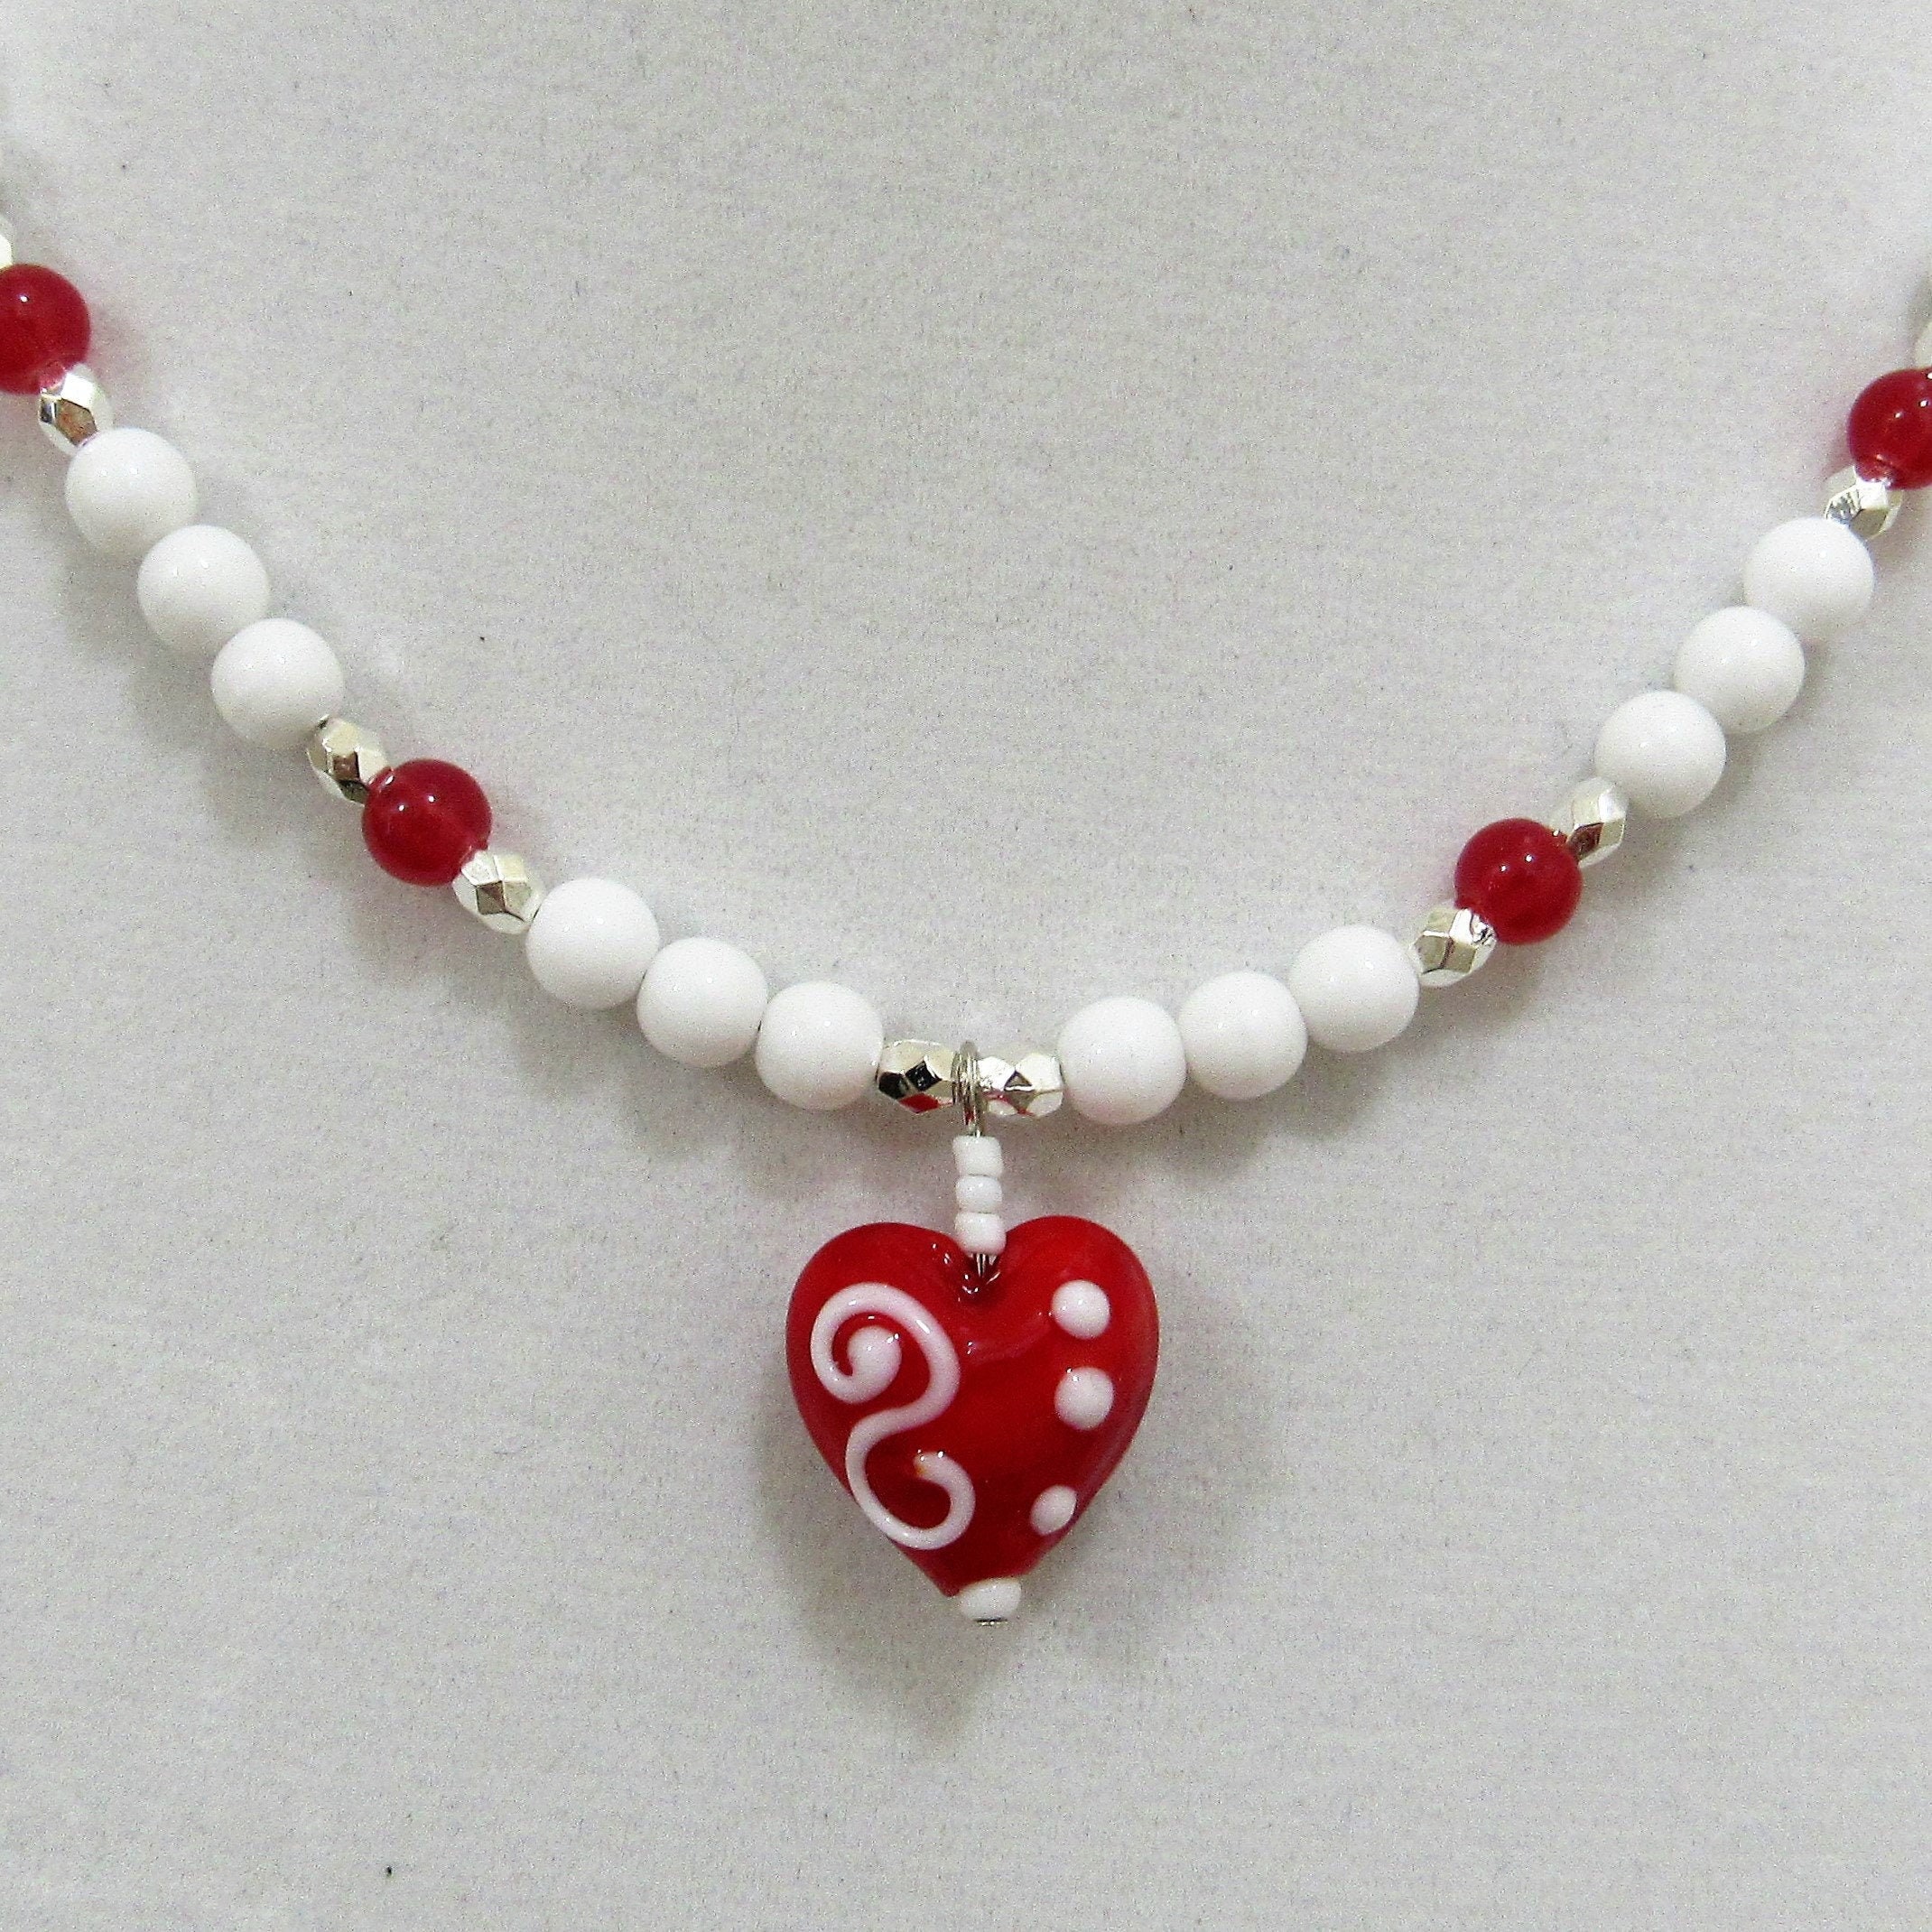 Lampworked Red Heart Pendant Necklace With White Designs - Etsy